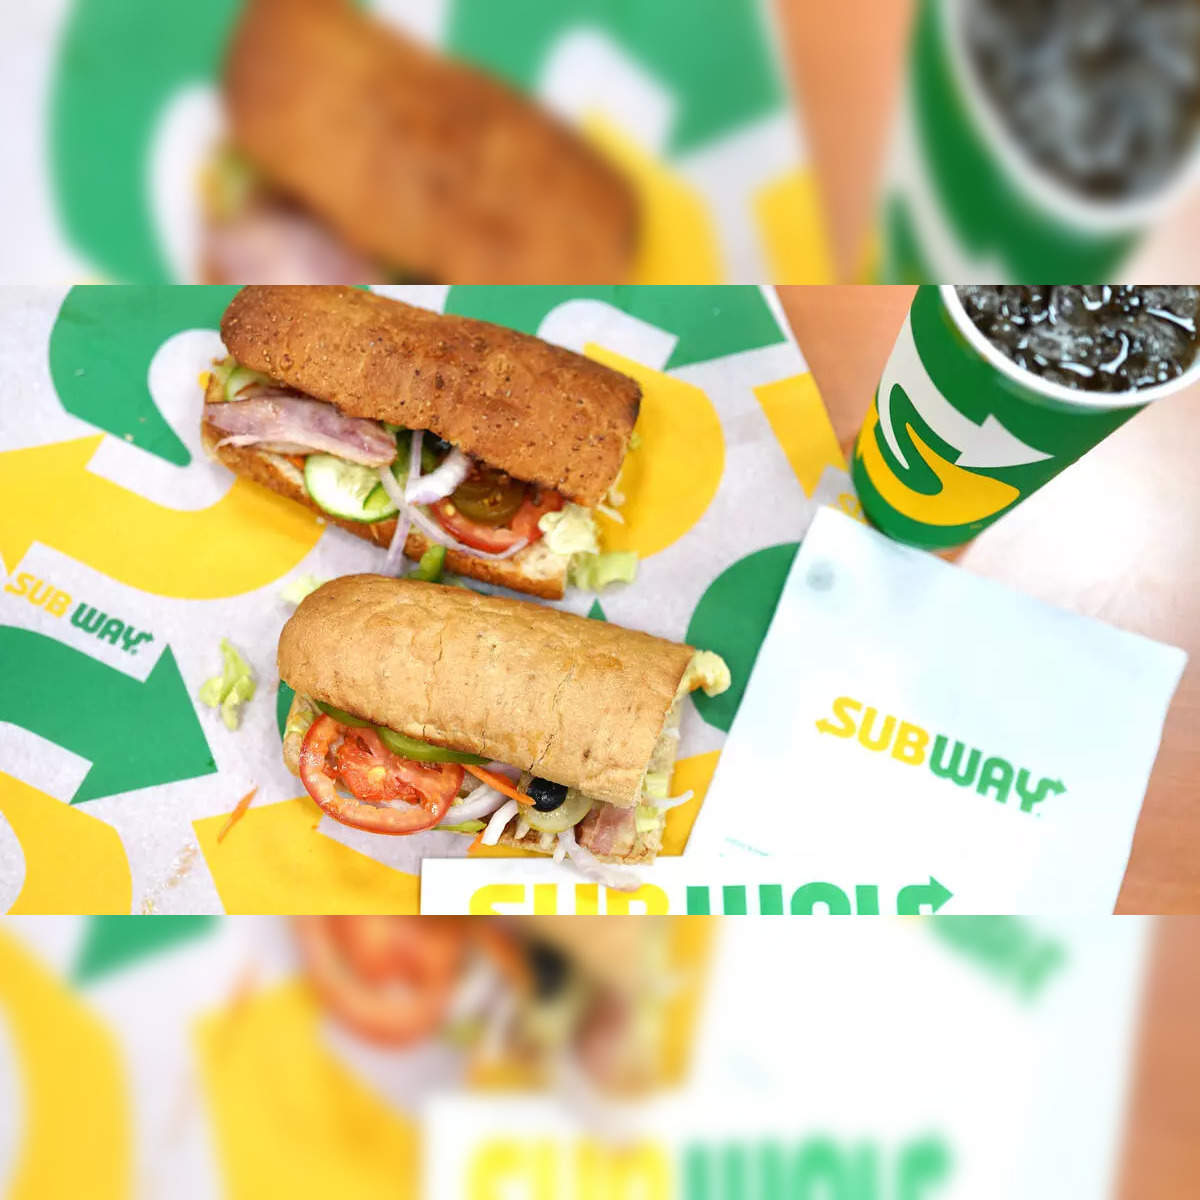 Subway Coupons in Today's Paper & On Today's Front Page 